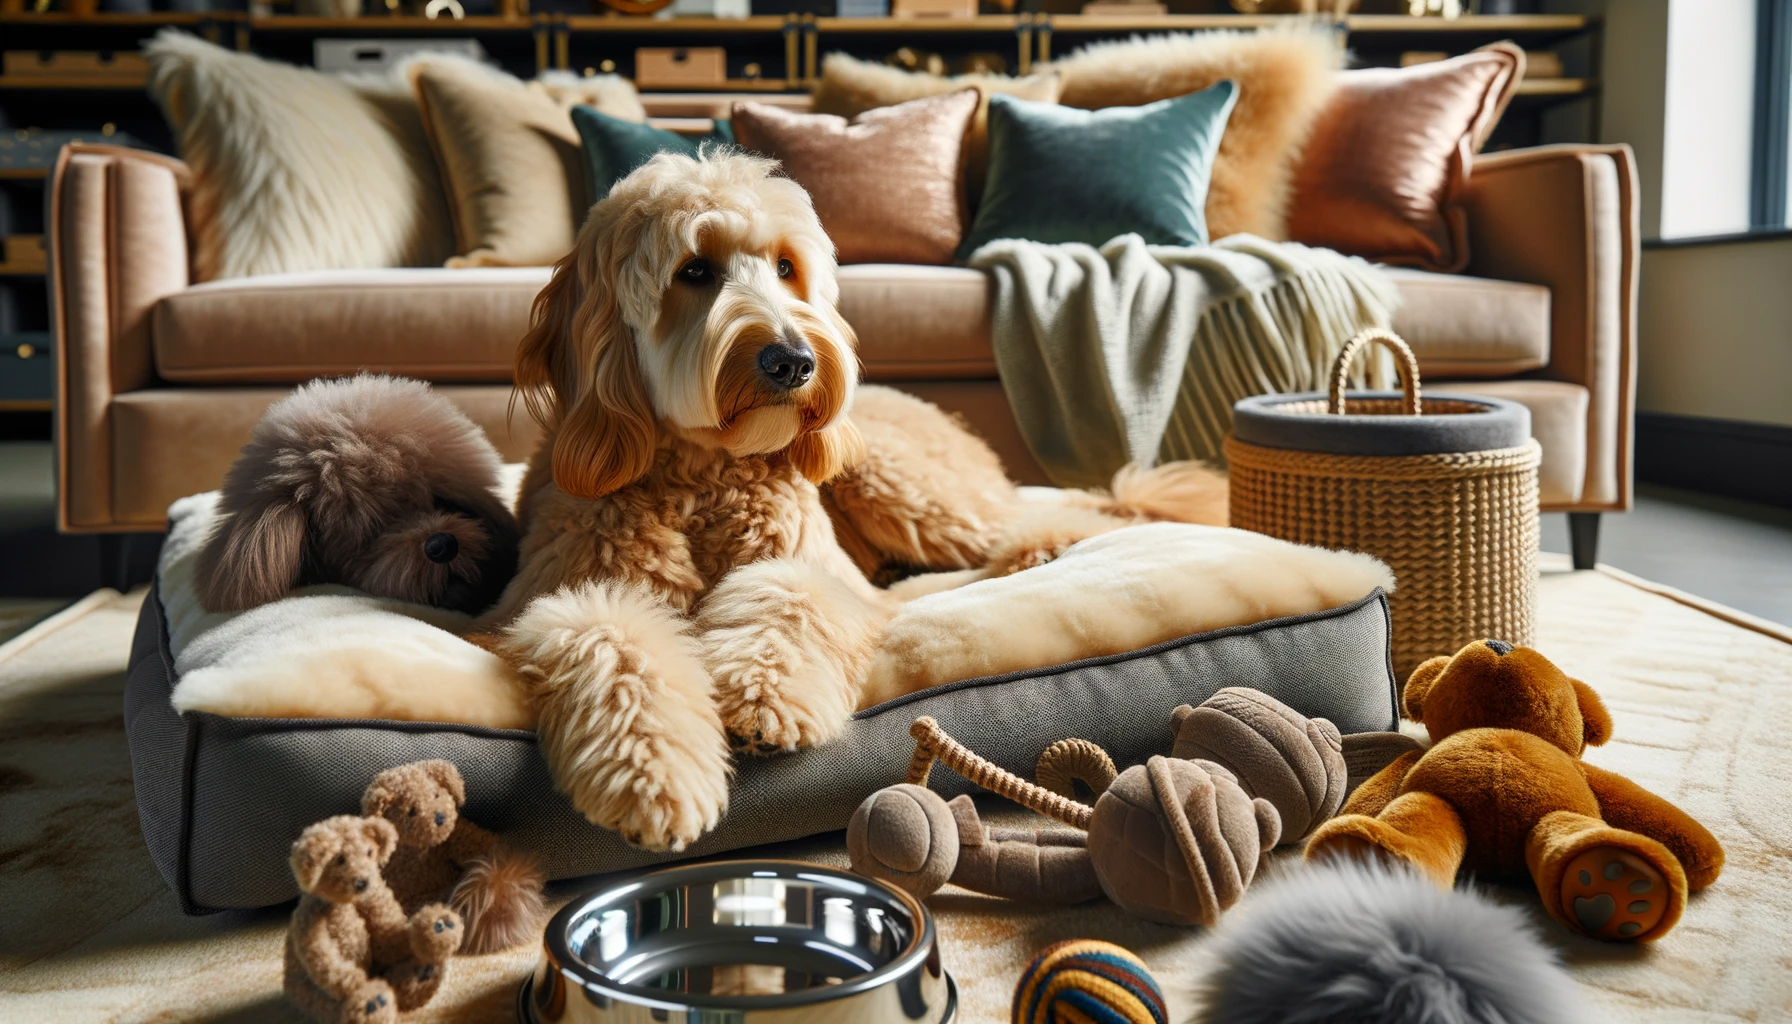 Photo of a relaxed Labradoodle lounging on a plush dog bed in a luxurious setting. The dog is surrounded by high-end pet accessories like toys, cushions, and a fancy feeding bowl, capturing the essence of the good life and comforts that ownership offers.